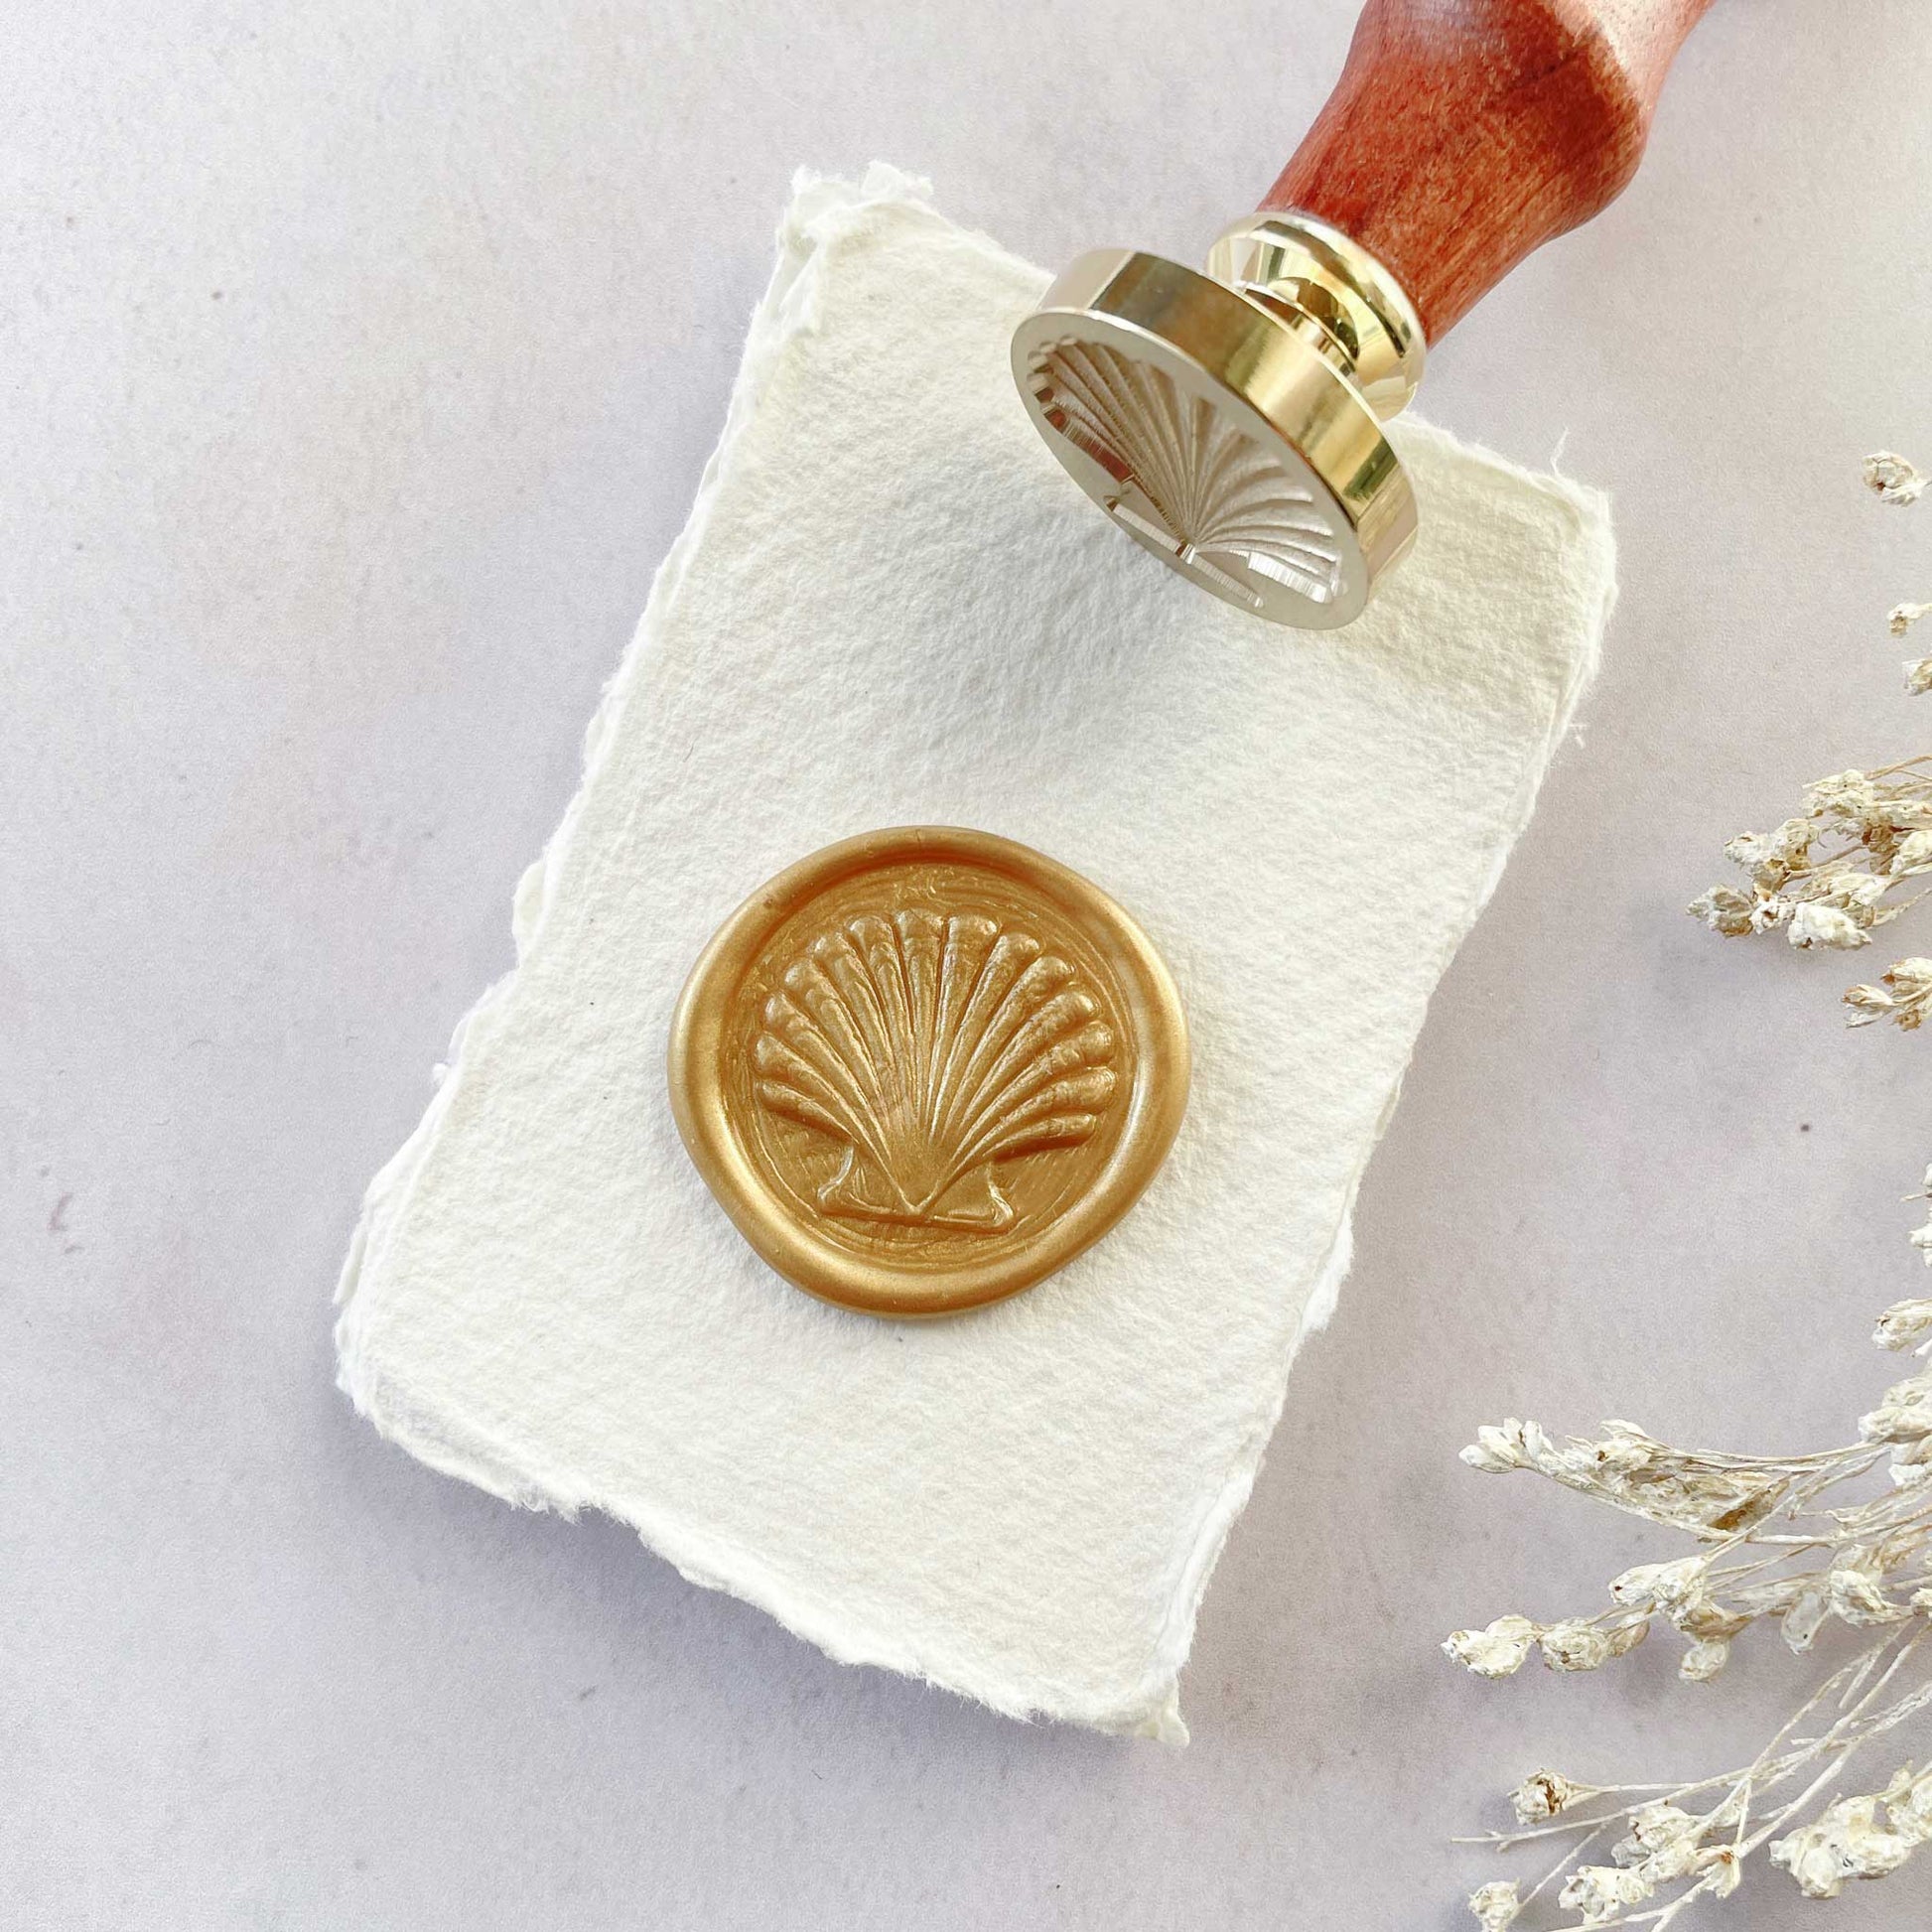 Seashells Wax Stamp by The Natural Paper Company.  Sealing Wax Stamp with a Coastal design.